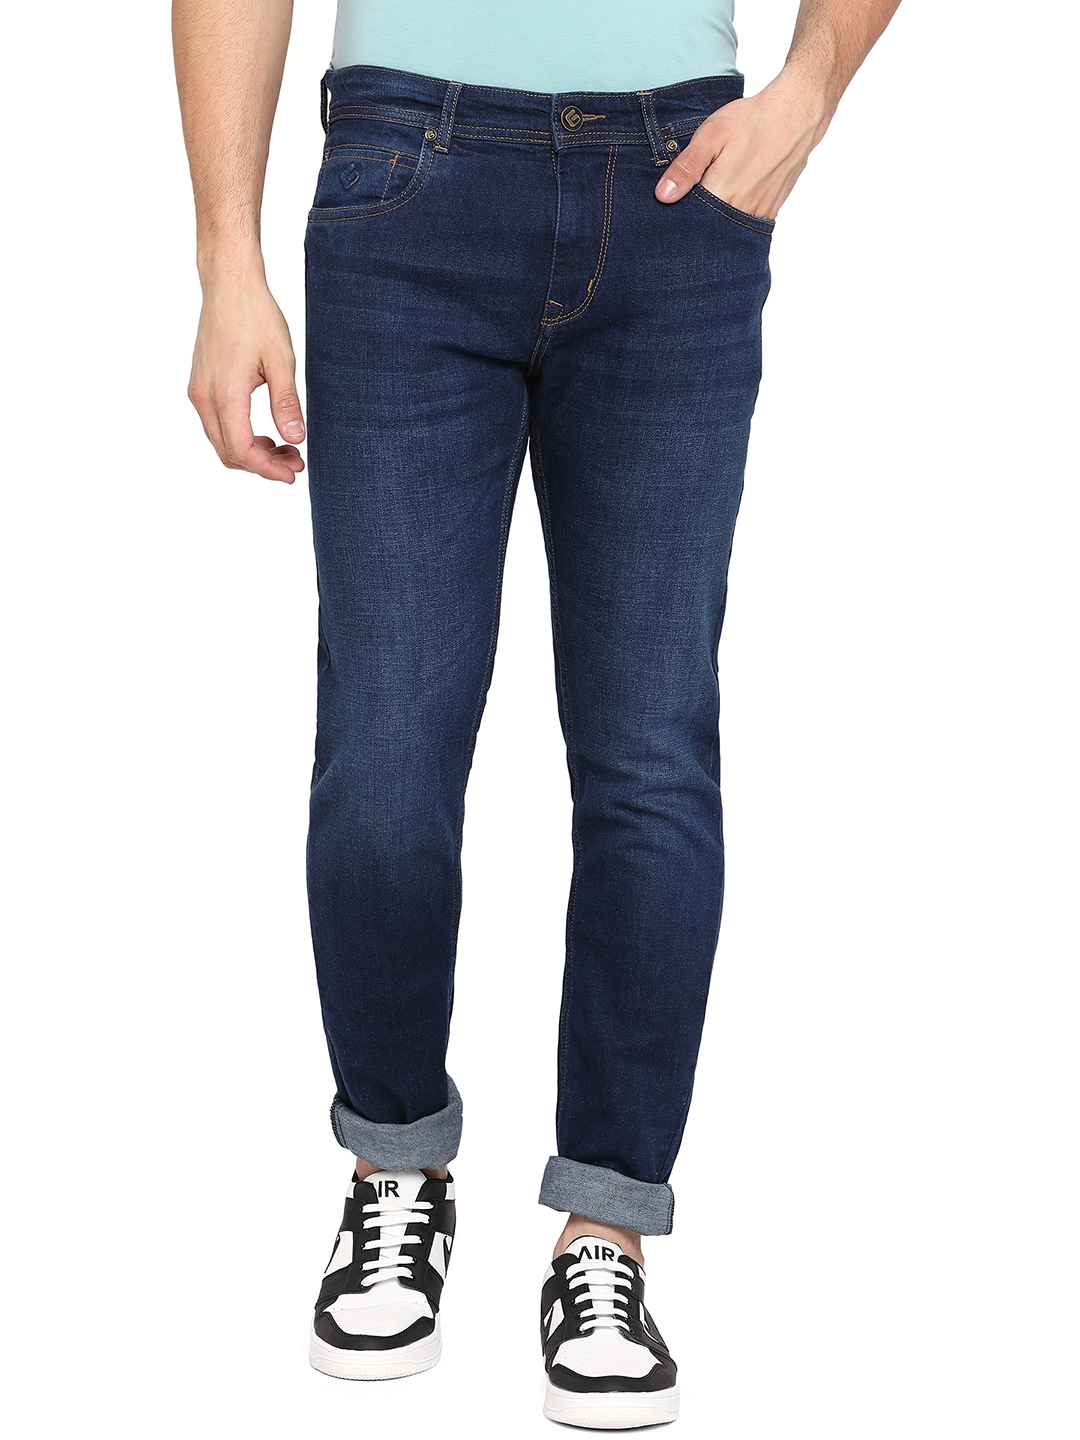 Greenfibre | Dark Blue Washed Narrow Fit Jeans | Greenfibre